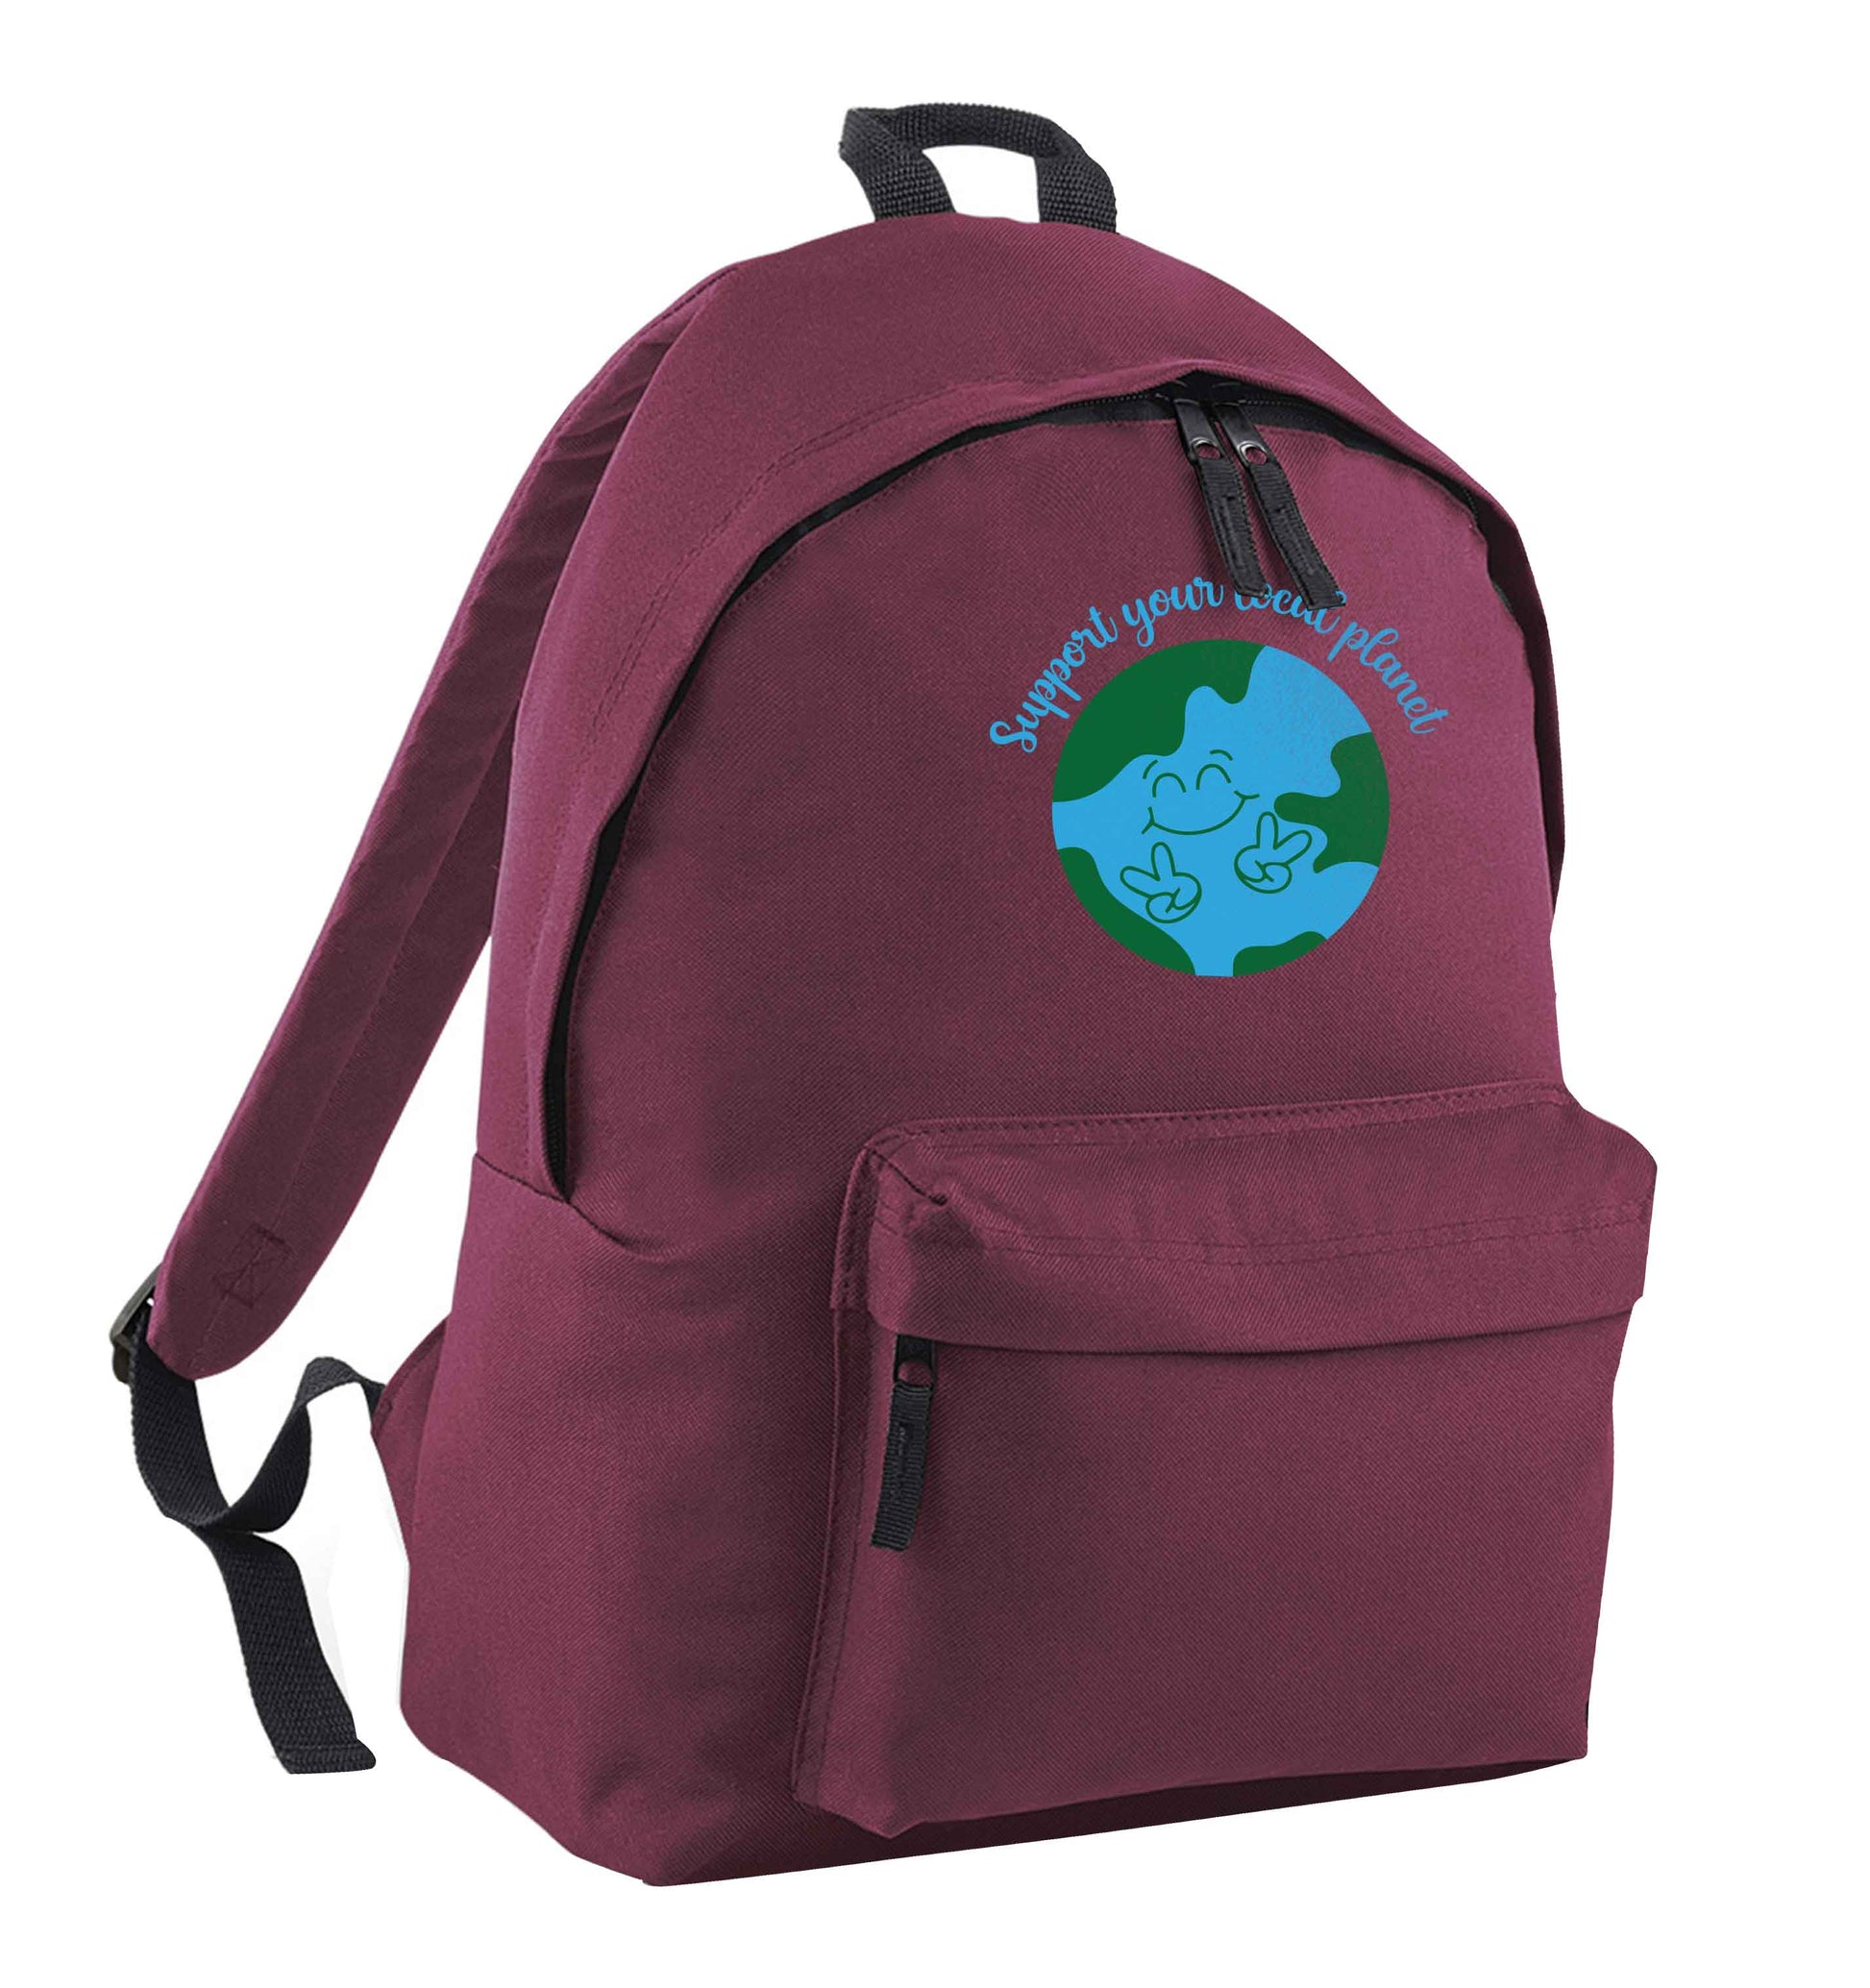 Support your local planet maroon children's backpack